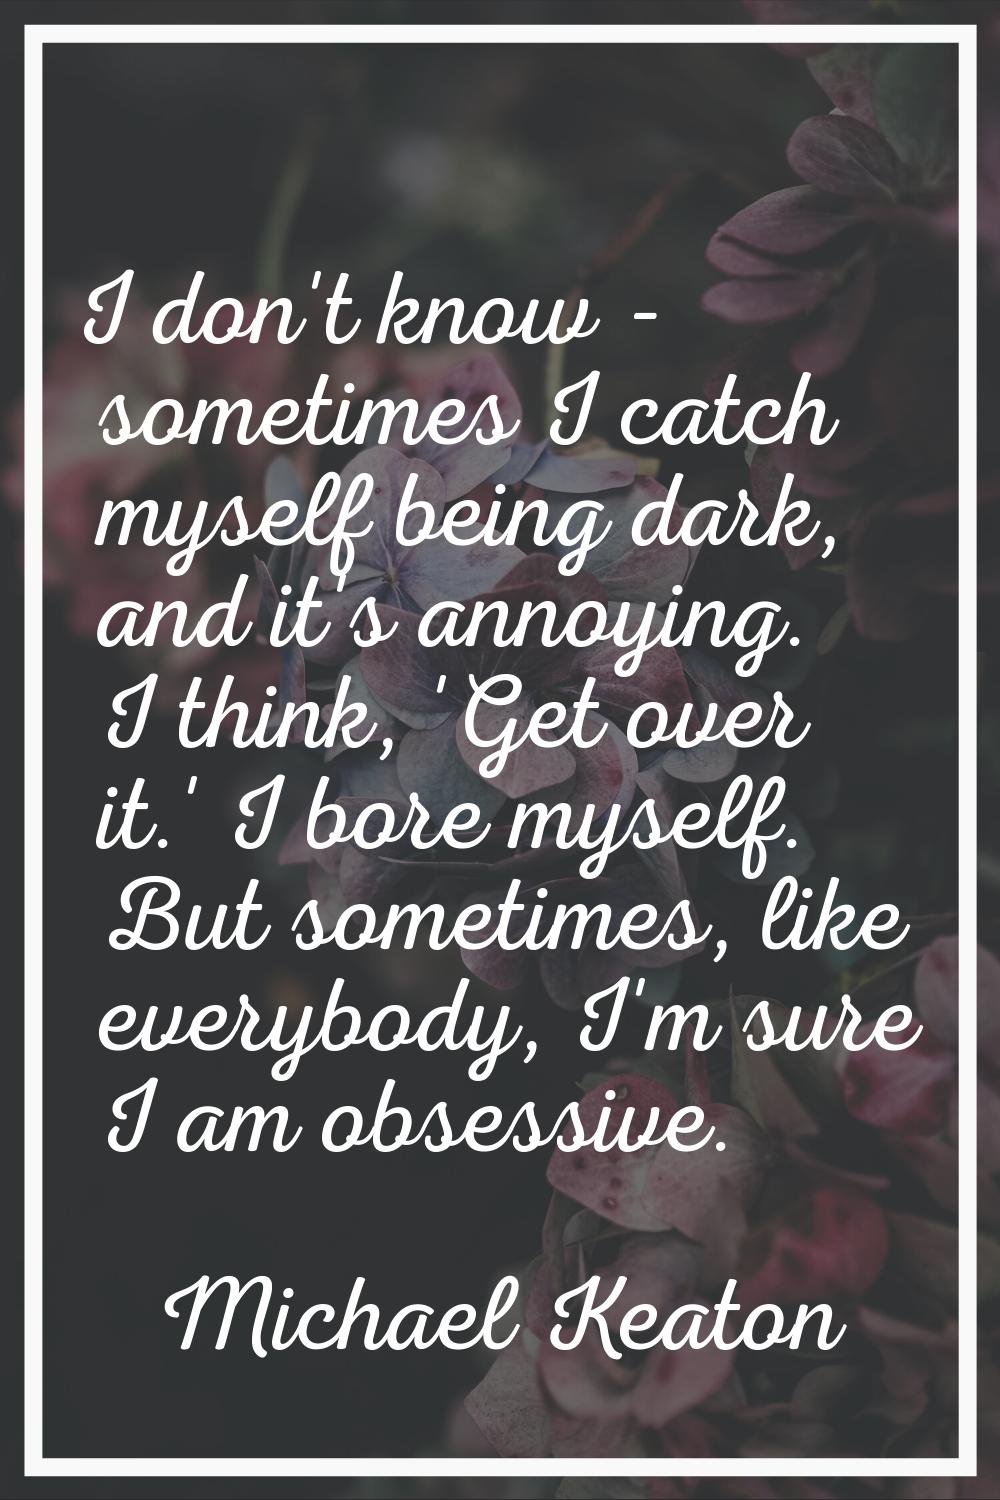 I don't know - sometimes I catch myself being dark, and it's annoying. I think, 'Get over it.' I bo